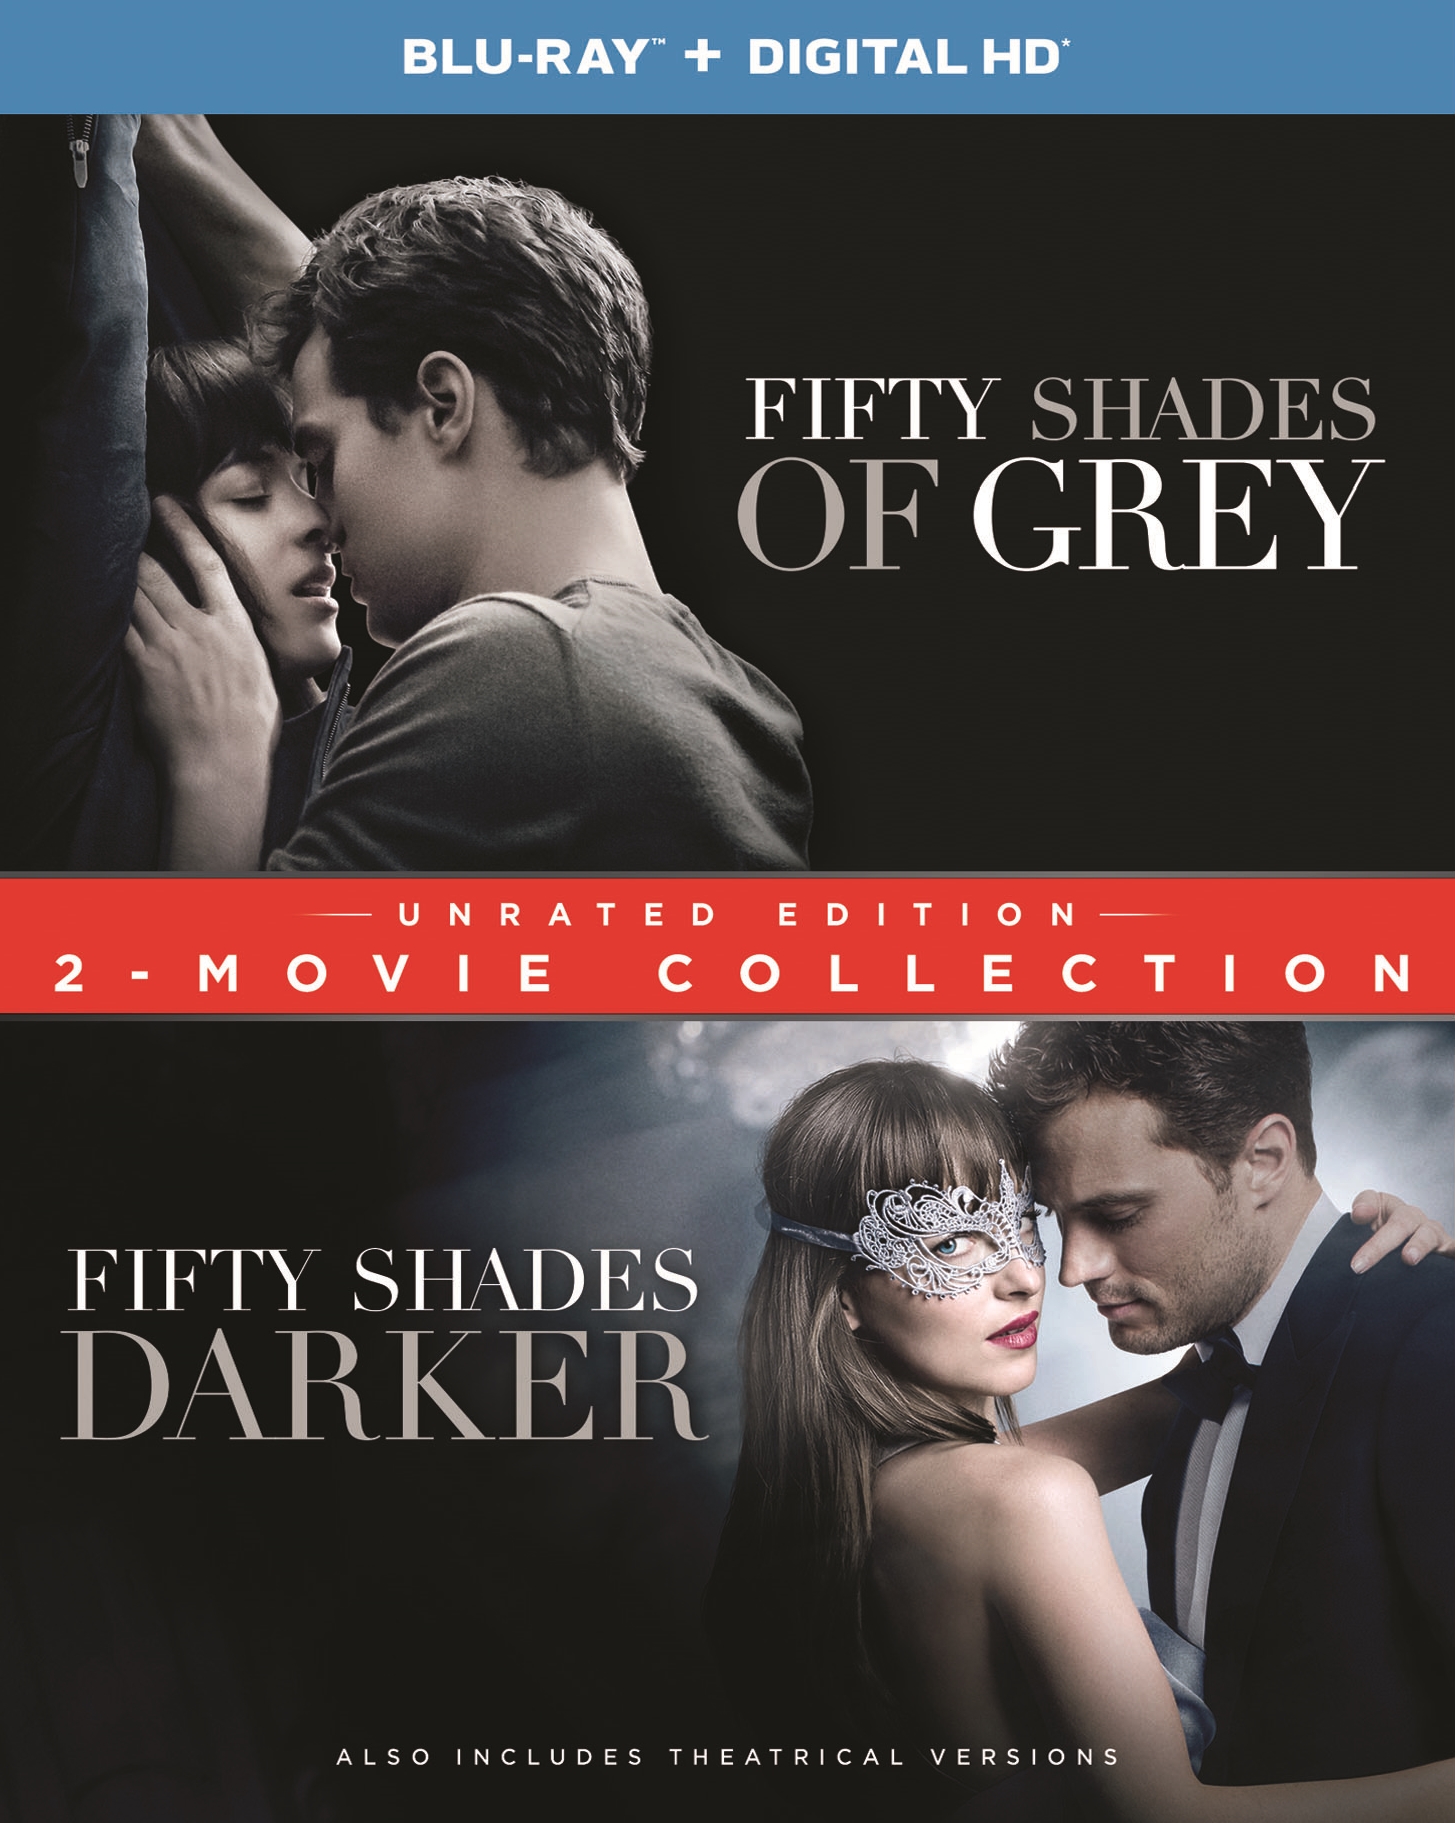 Fifty Shades 2-Movie Collection Blu-ray/DVD 2 Discs